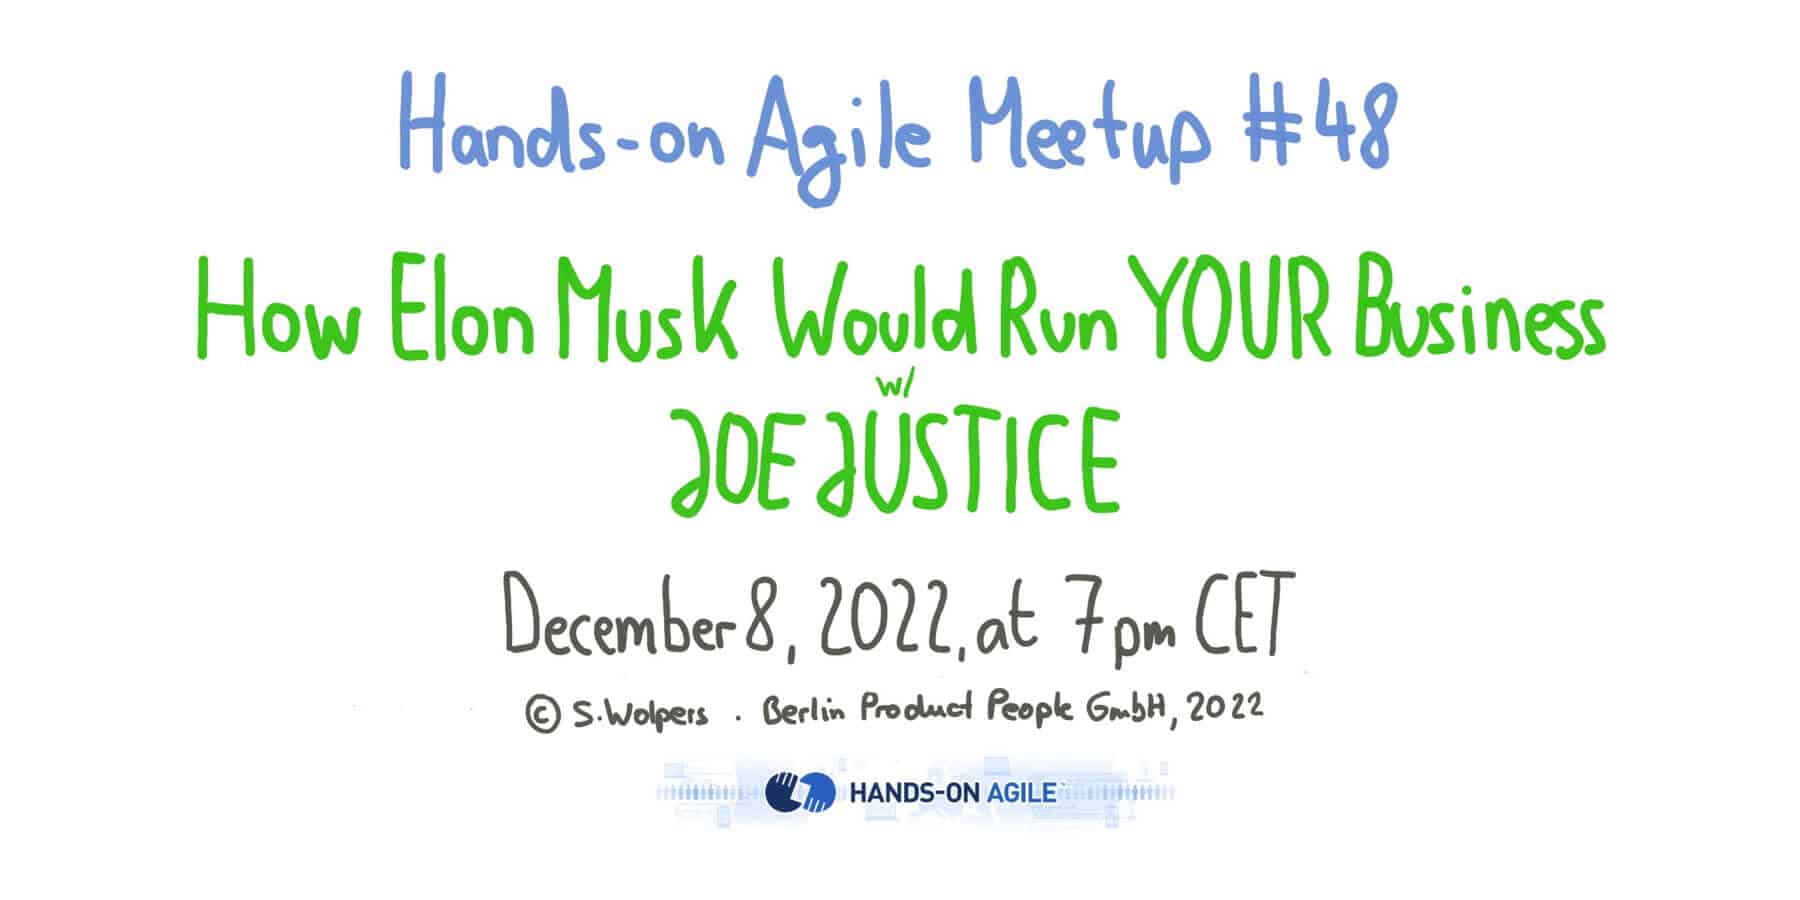 Hands-on Agile #48, December 8, 2022: How Elon Musk Would Run YOUR Business with Joe Justice — Berlin Product People GmbH